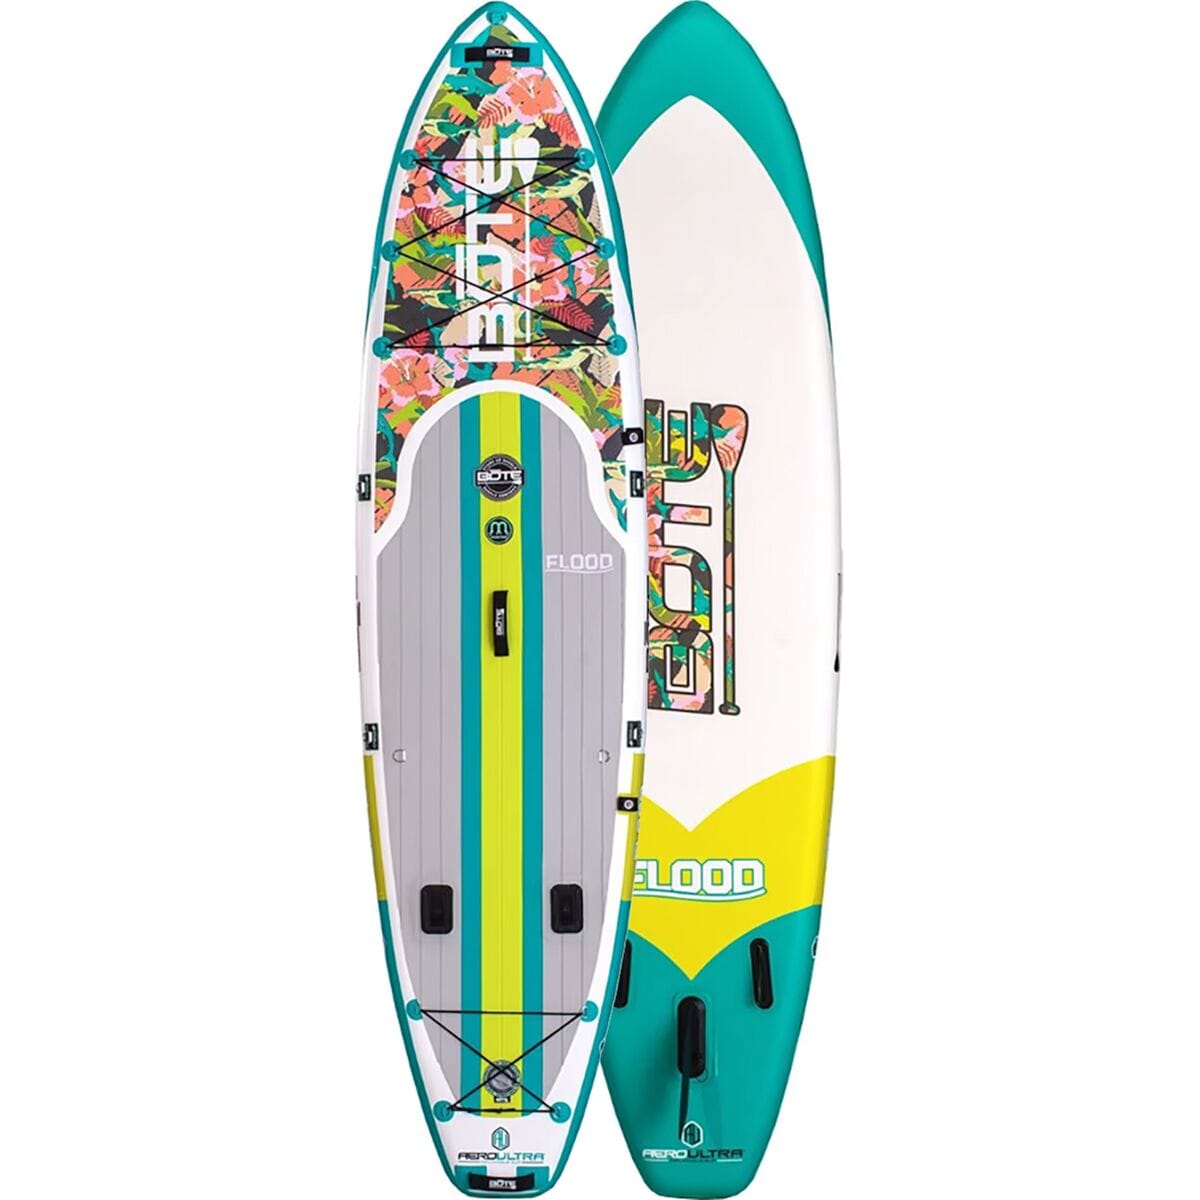 BOTE Flood Aero 11ft Inflatable Stand-Up Paddleboard - 2022